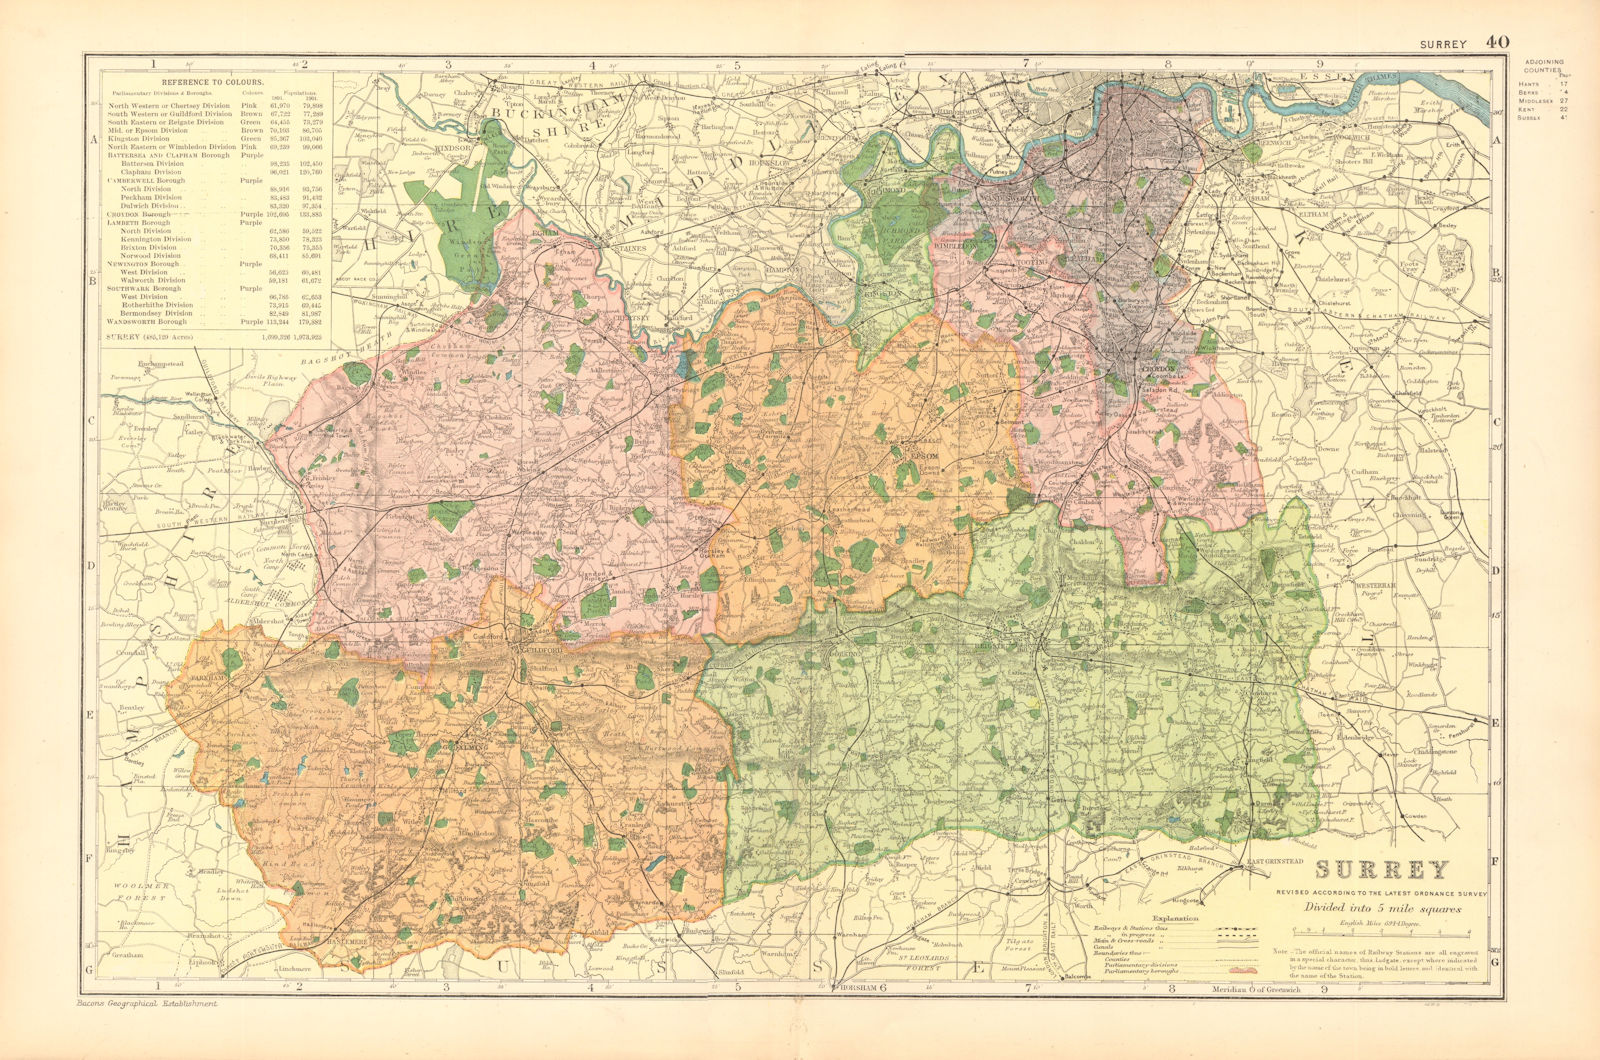 Associate Product SURREY. Showing Parliamentary divisions, boroughs & parks. BACON 1904 old map